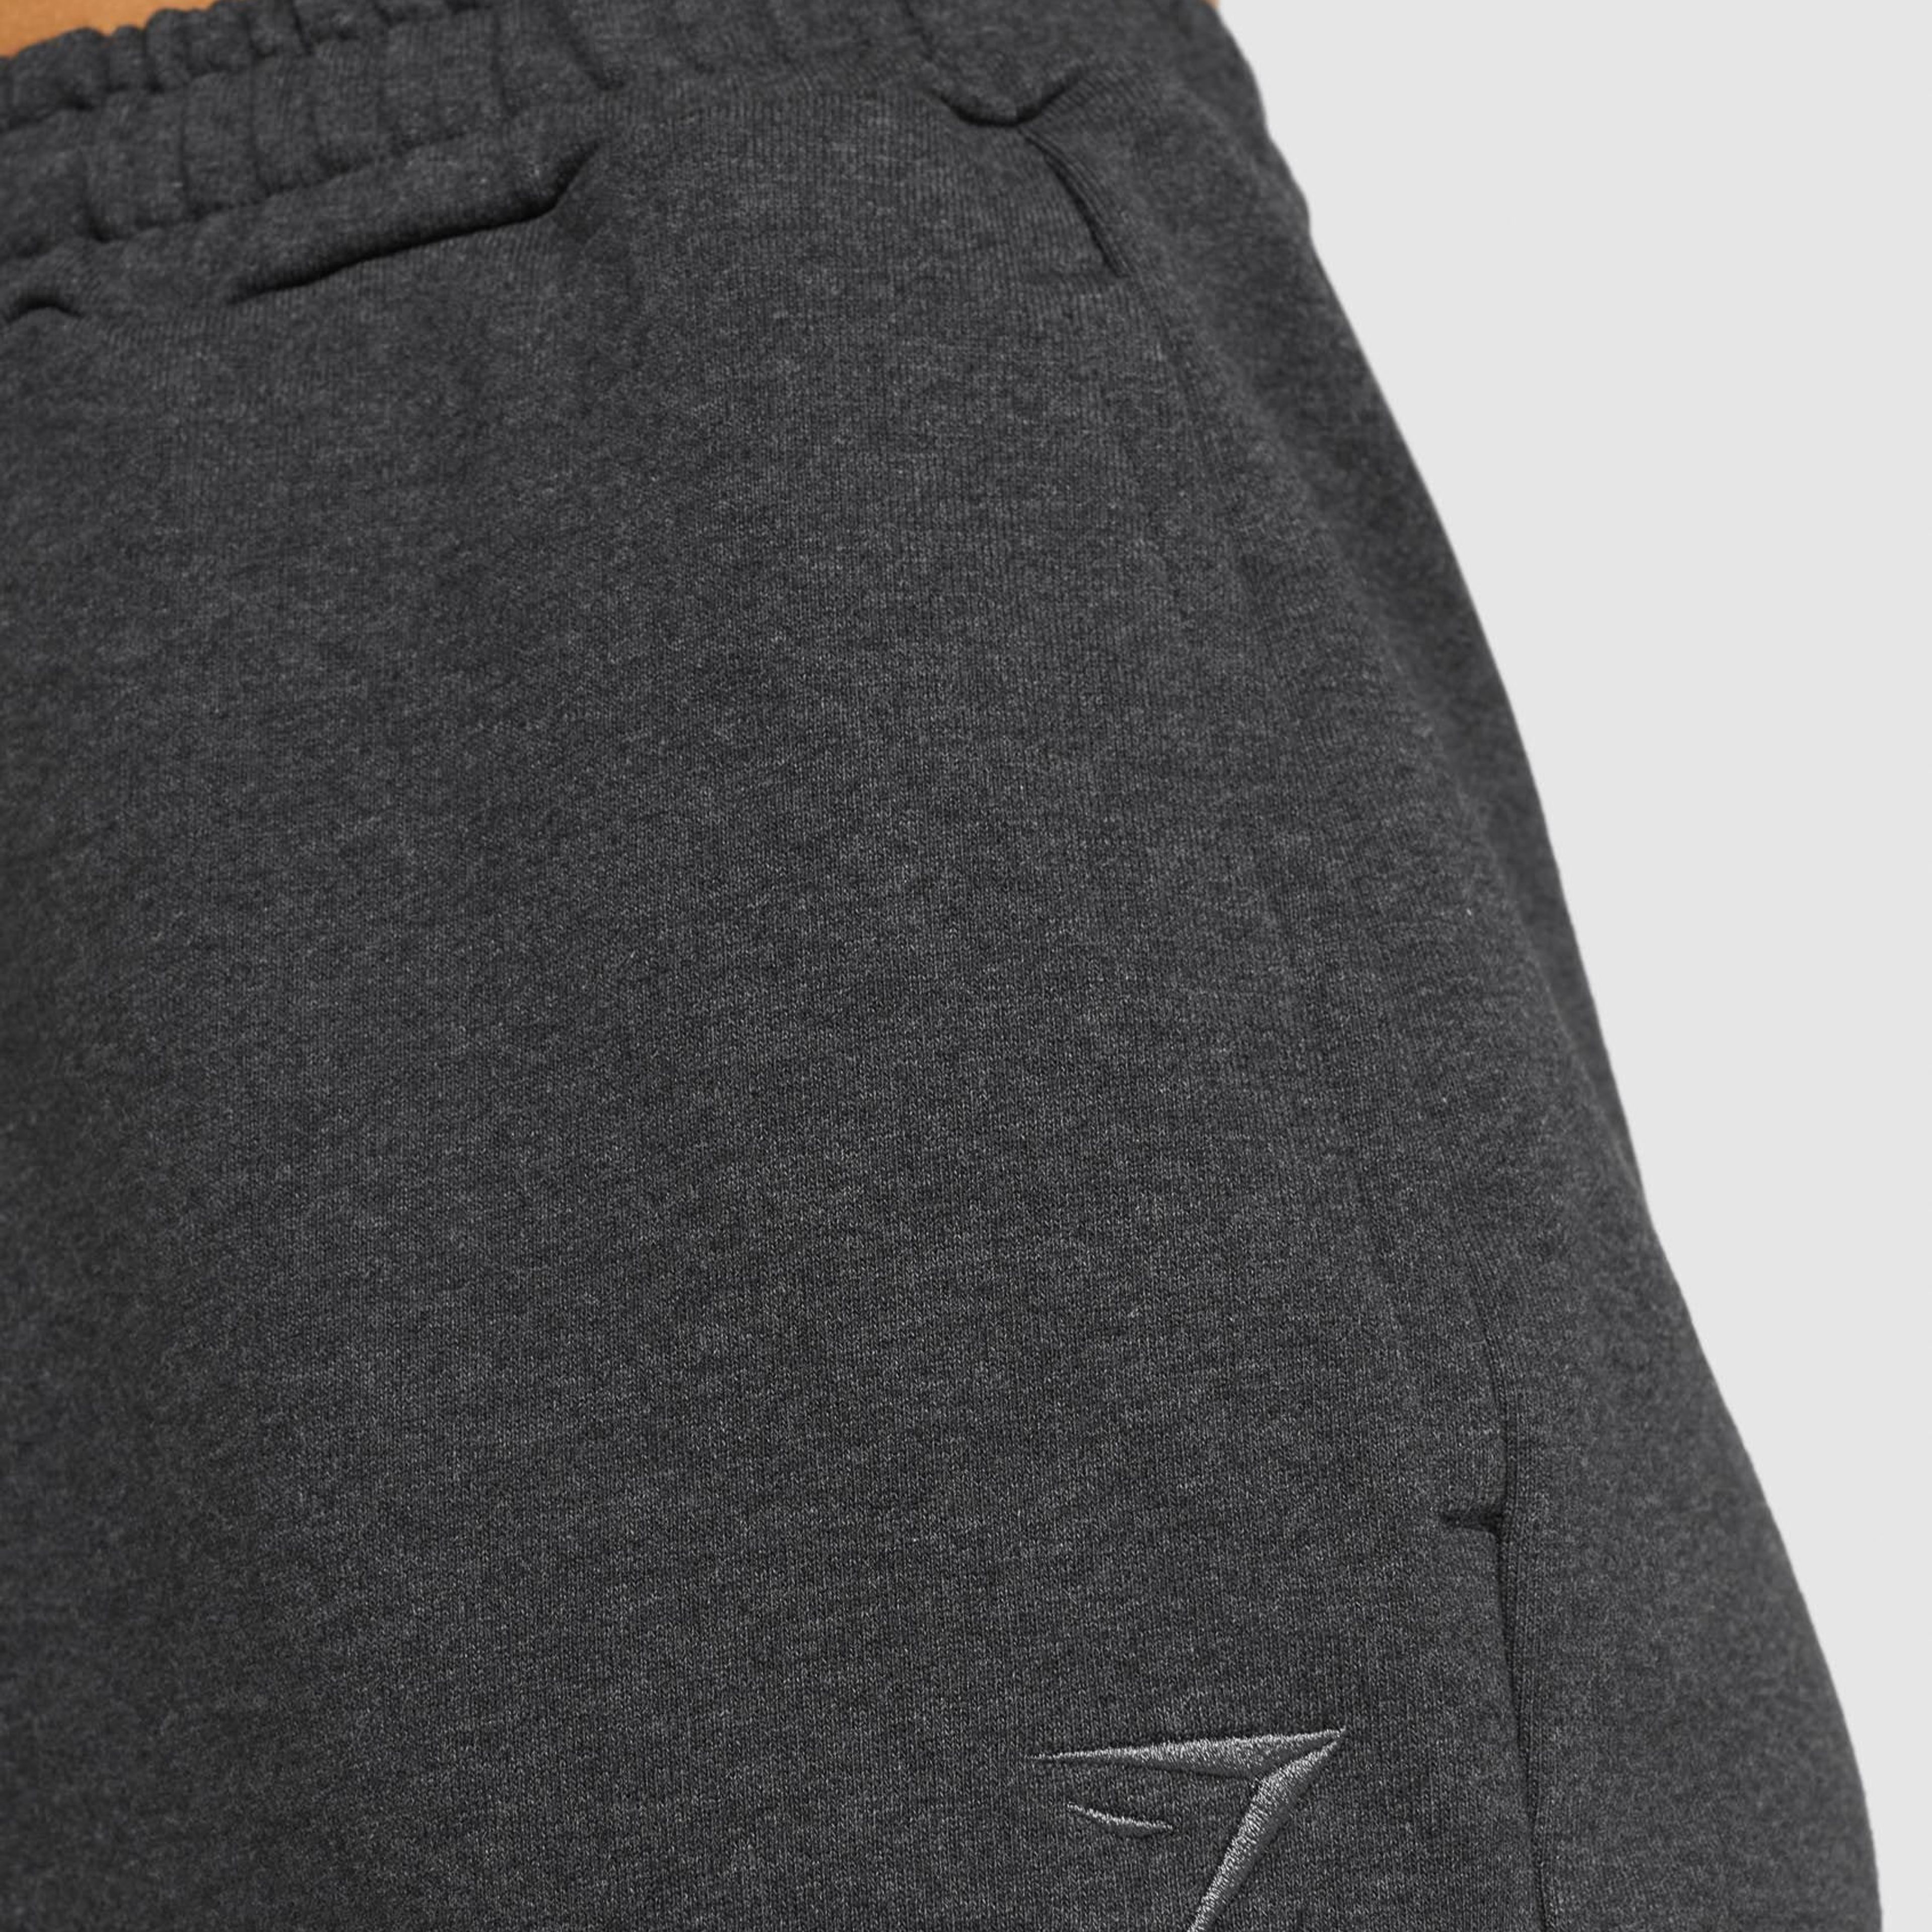 Rest Day Sweats Shorts